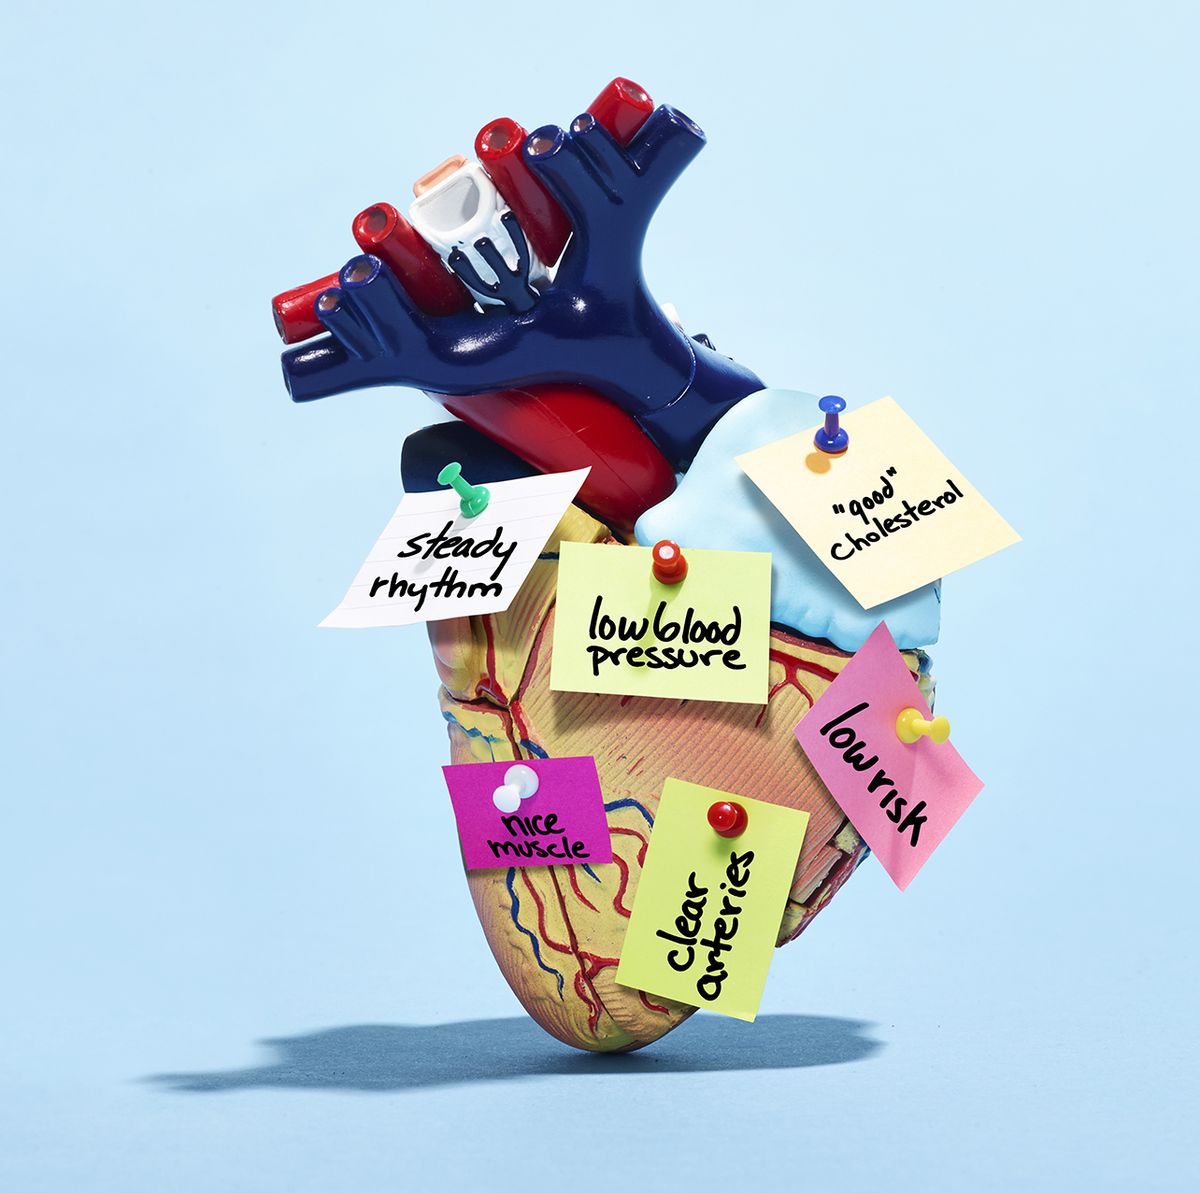 heart illustration pinned with lots of work demands on sticky notes